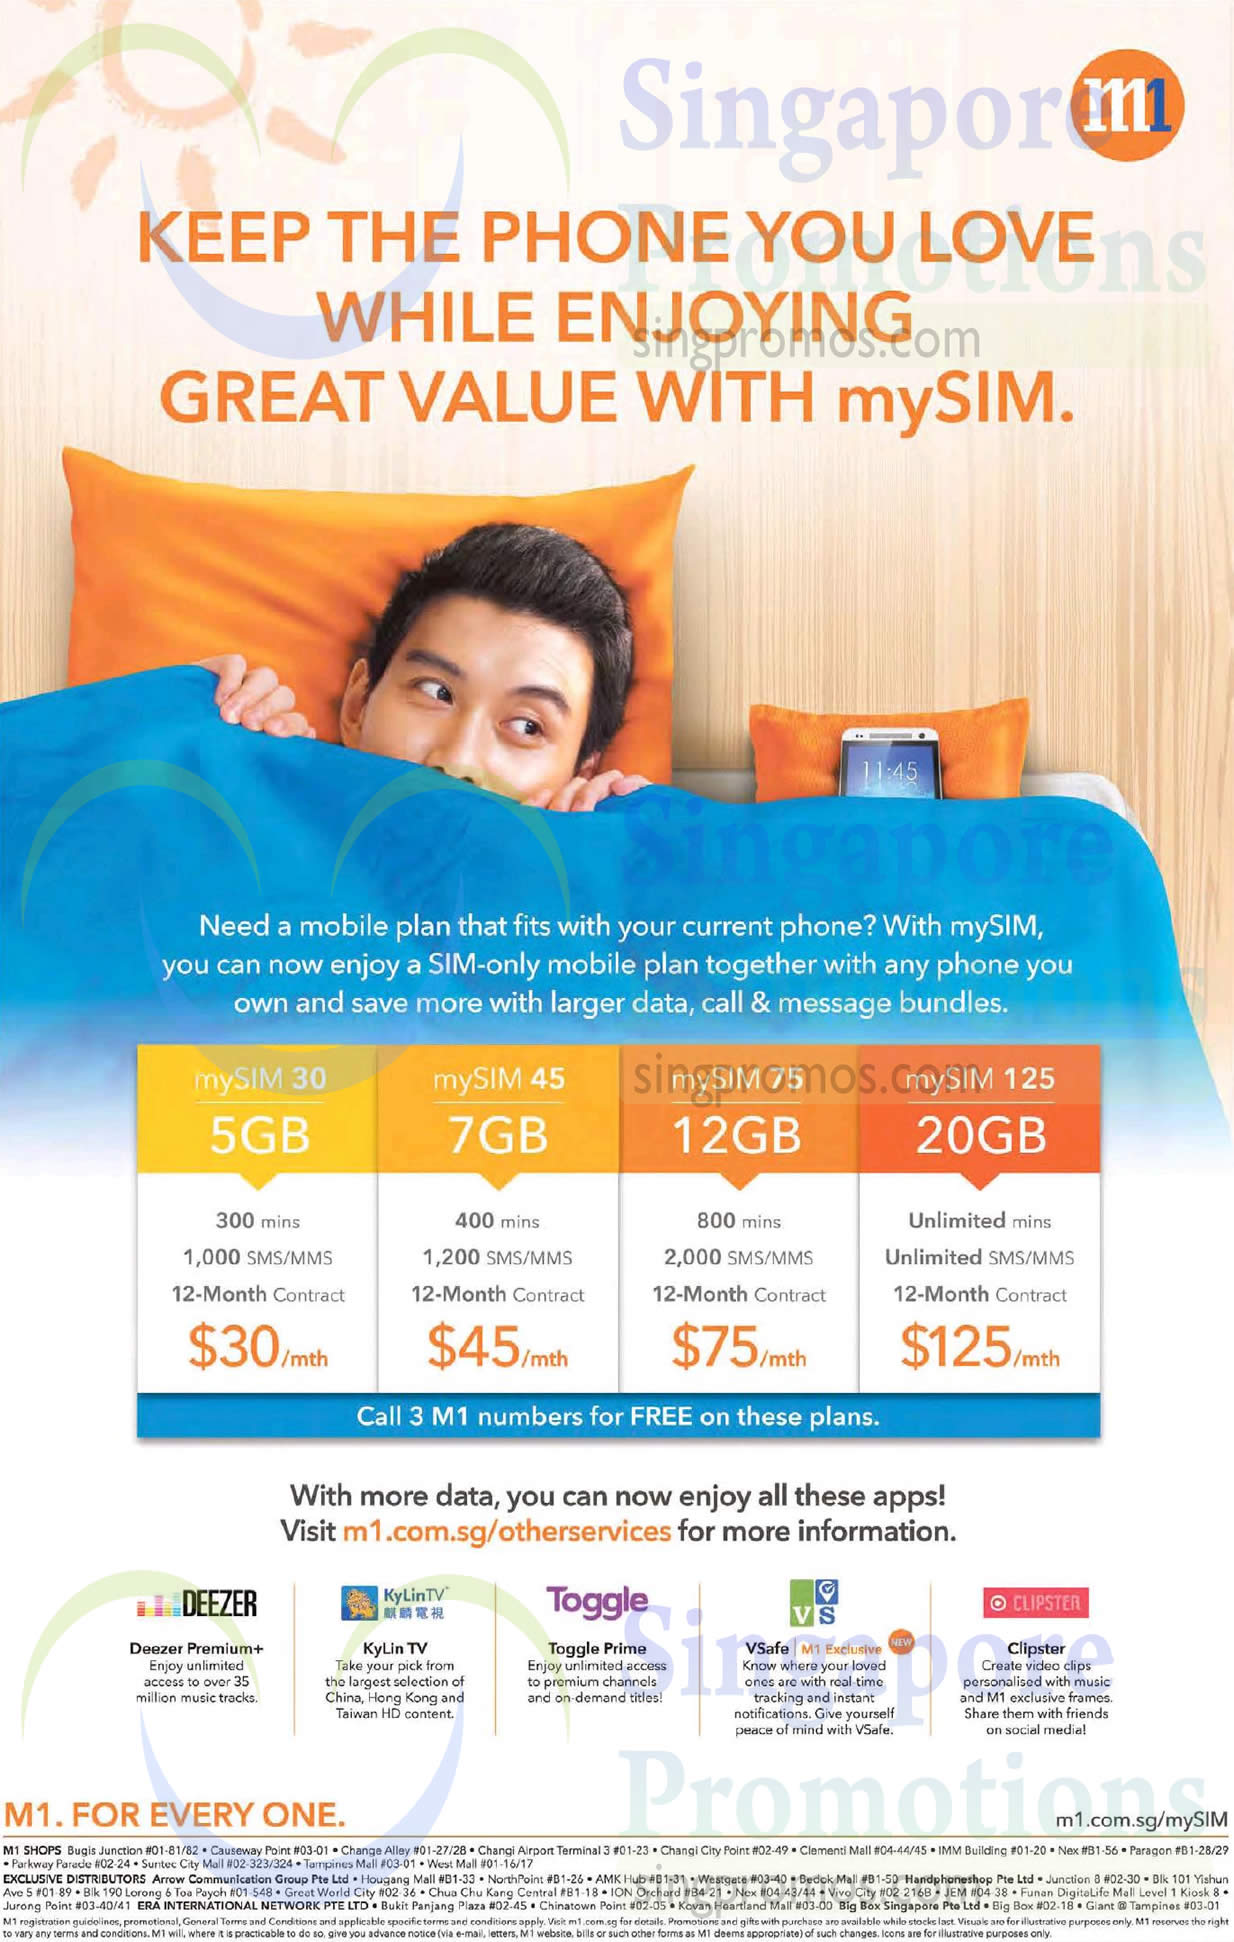 Featured image for M1 Home Broadband, Mobile & Other Offers 17 - 23 Oct 2015